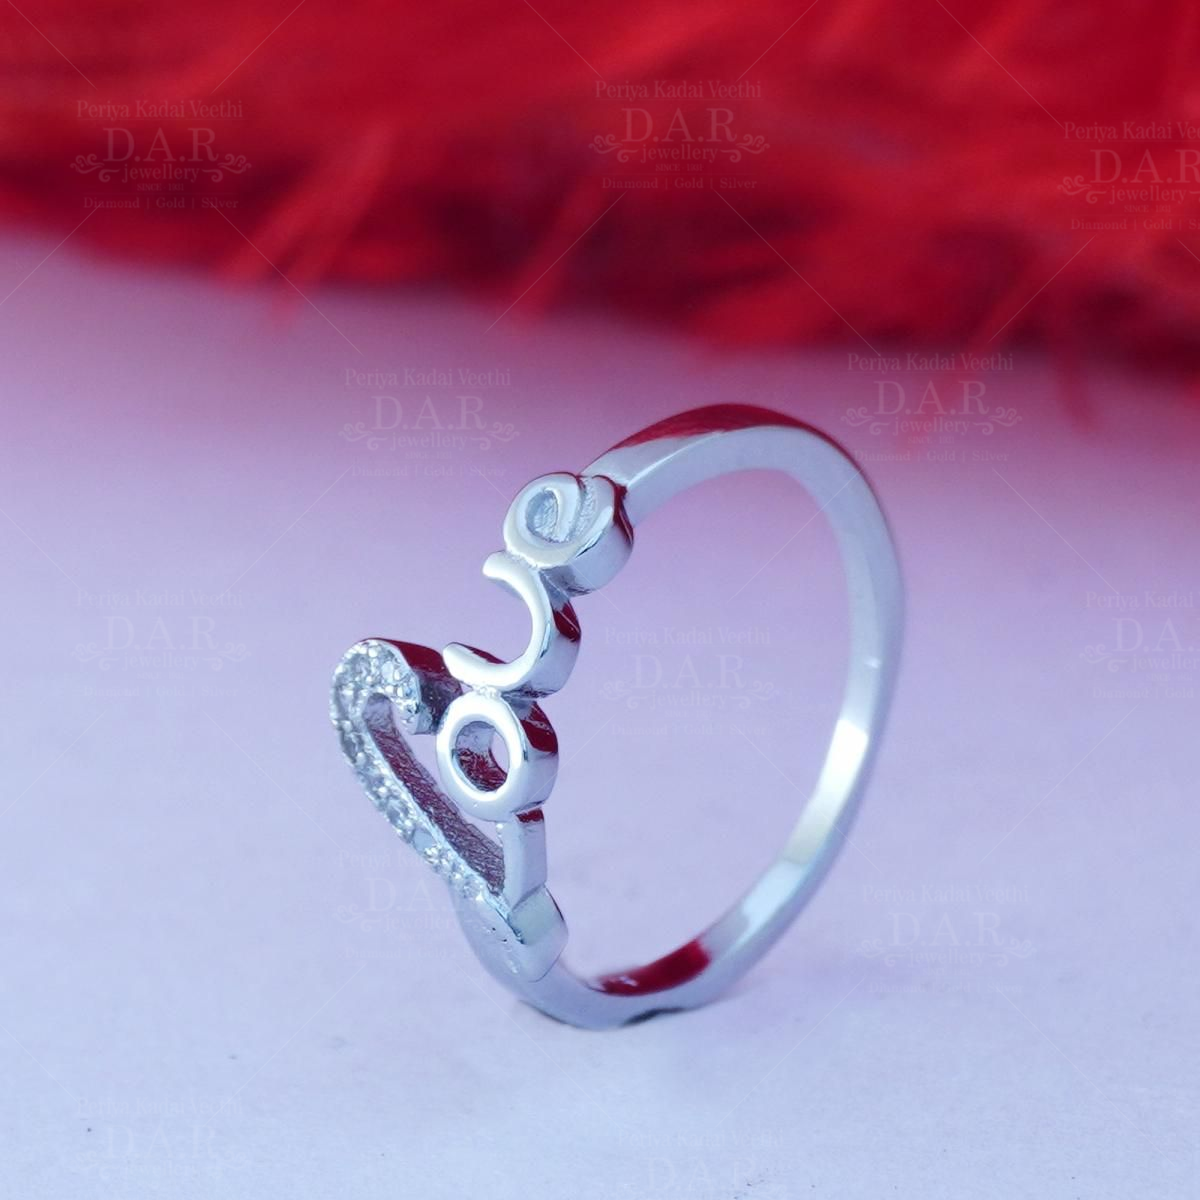 Buy quality 925 sterling silver CAPITAL LOVE diamond Ring in Ahmedabad